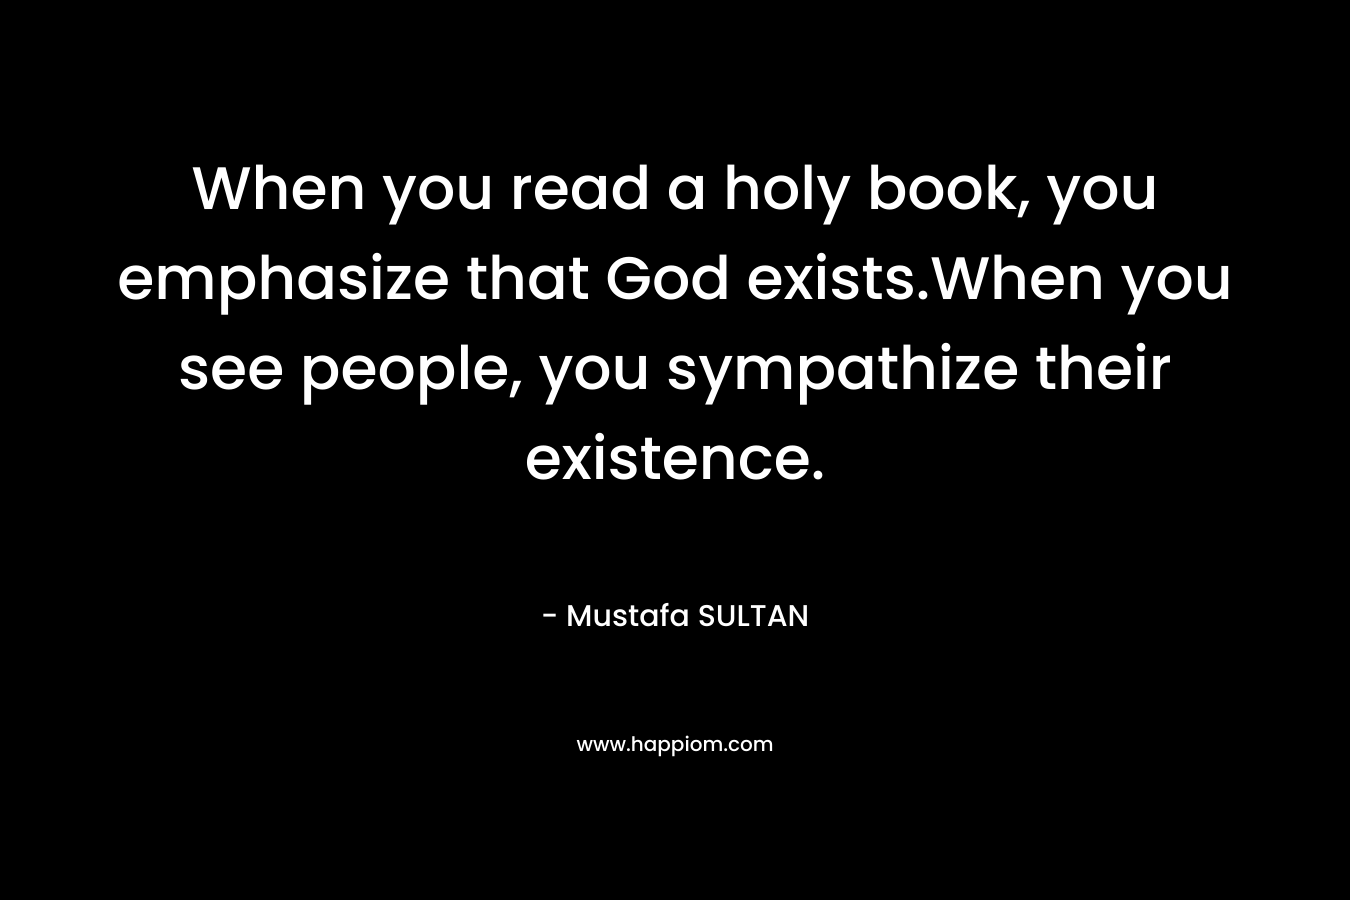 When you read a holy book, you emphasize that God exists.When you see people, you sympathize their existence. – Mustafa SULTAN